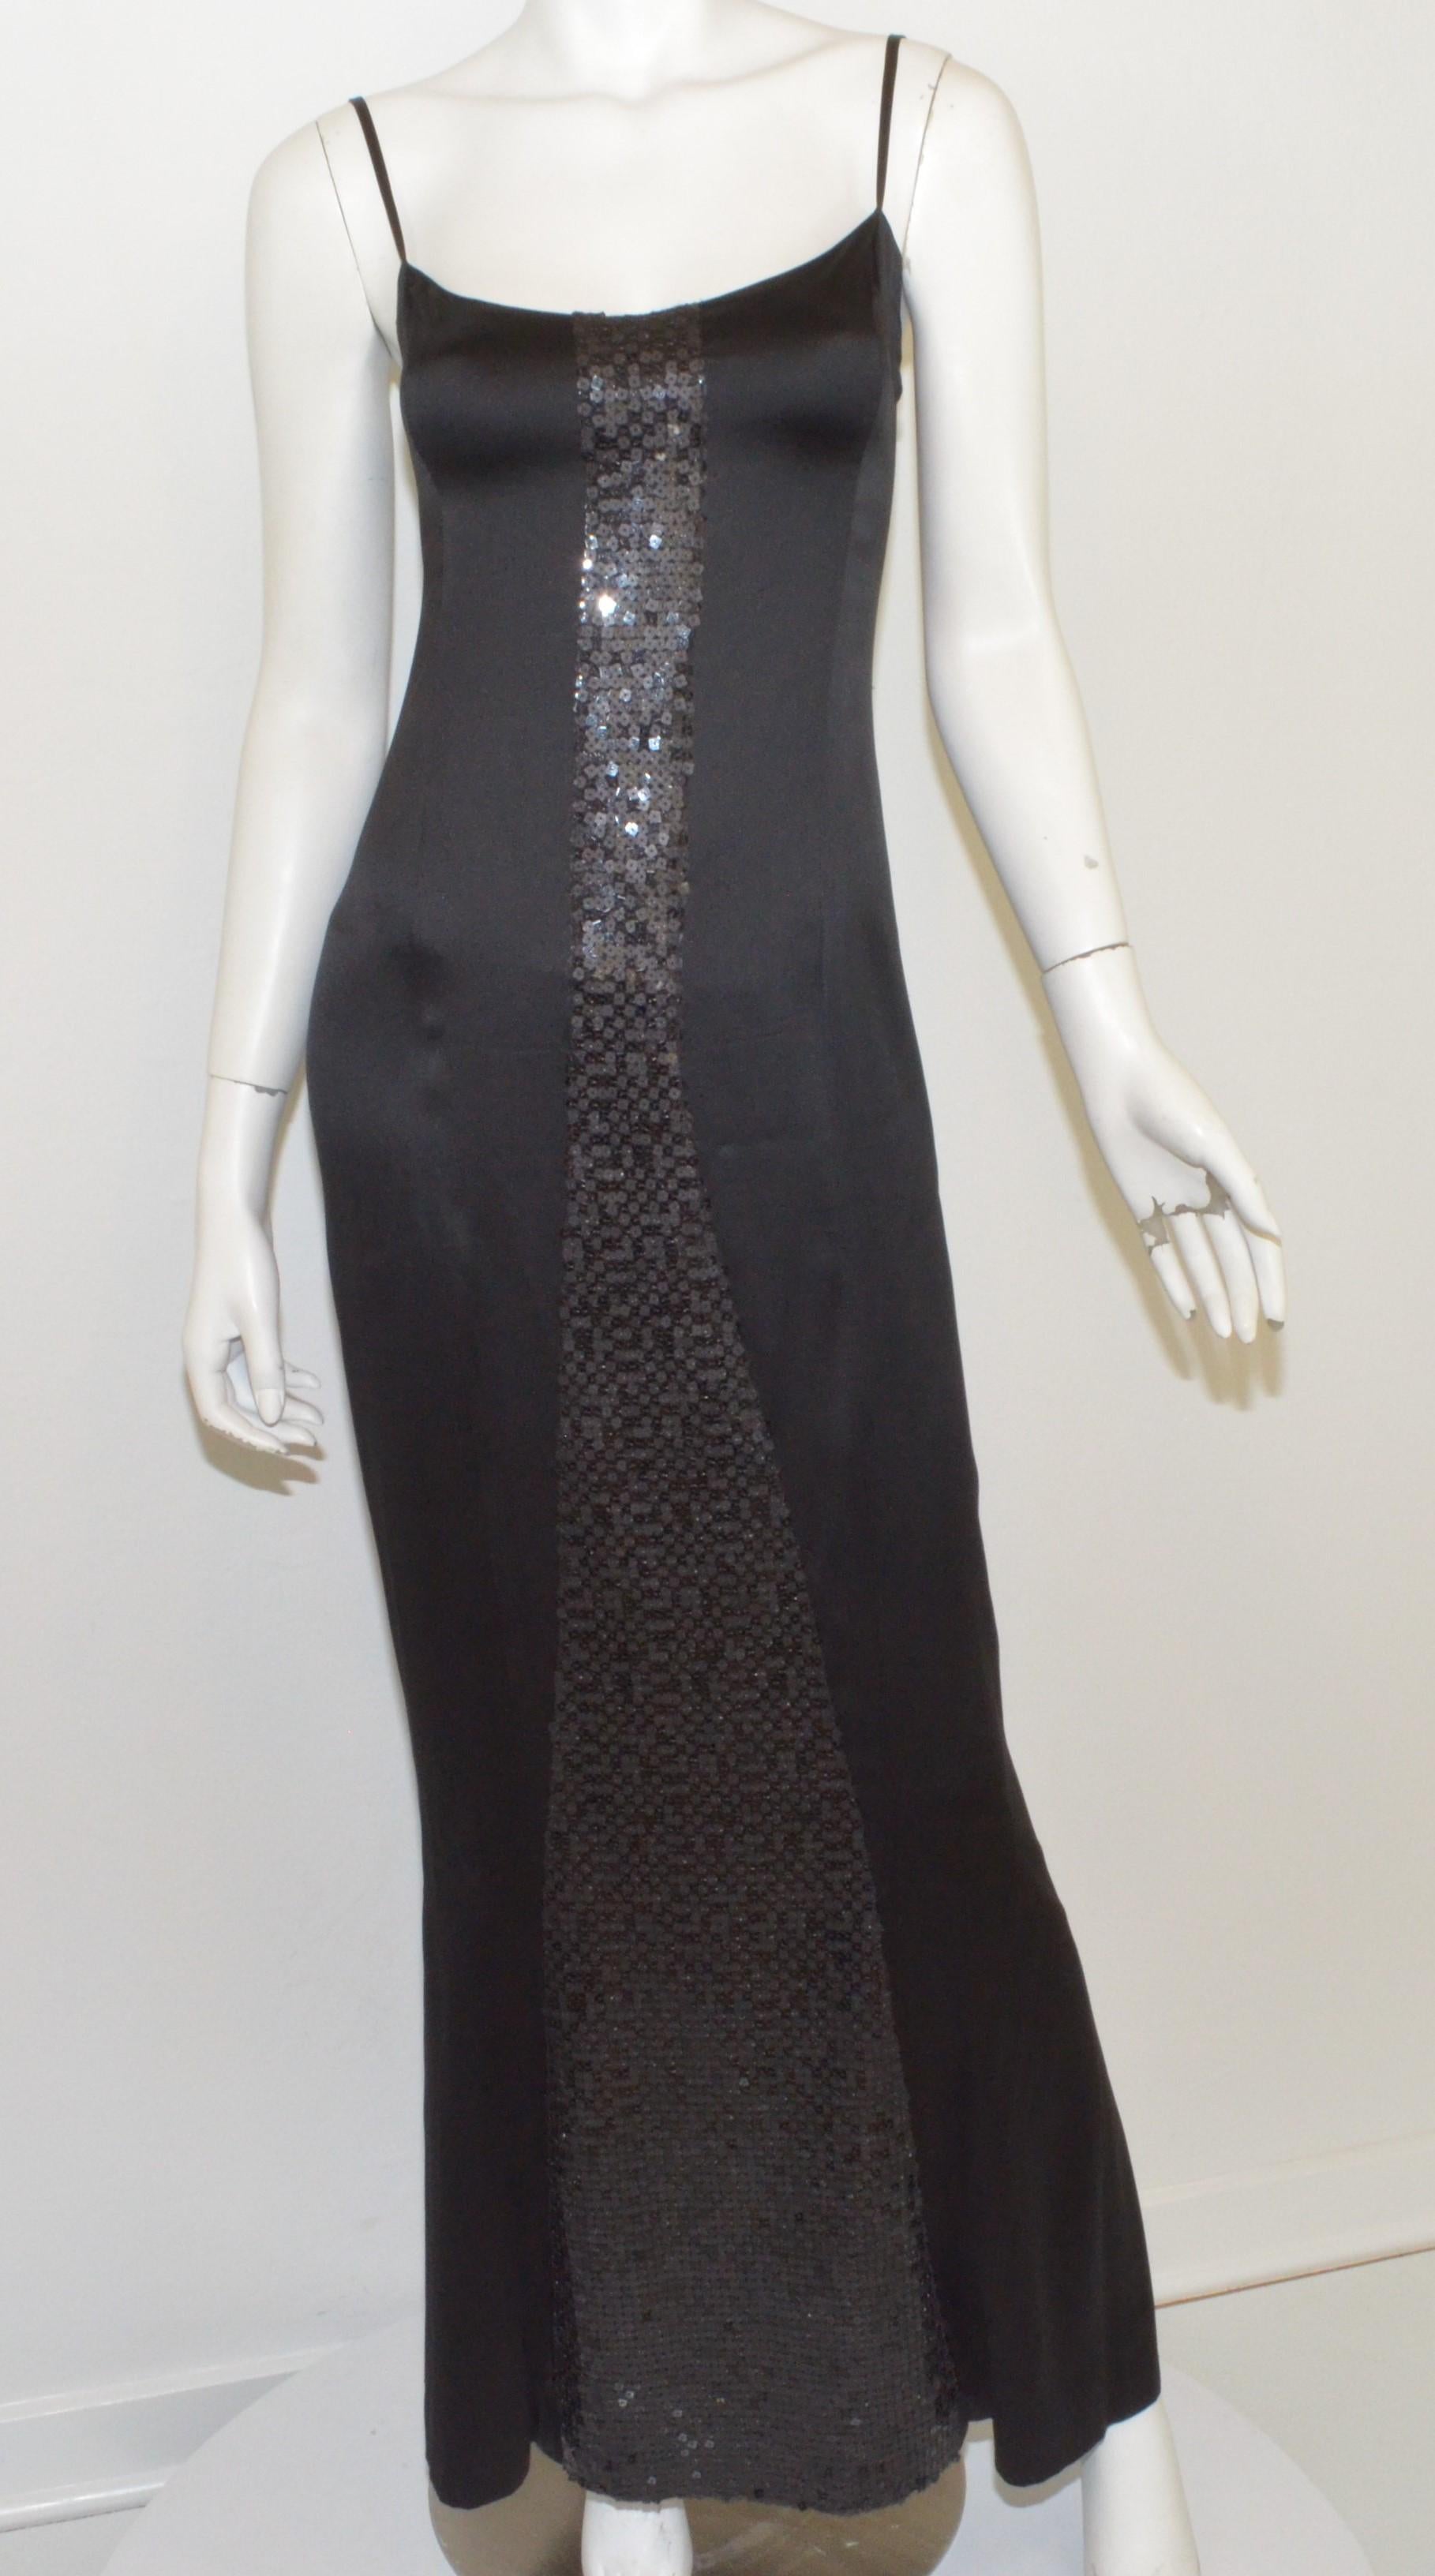 Chanel slip dress featured in black with sequin embellishments along the front and back, flat shoulder straps, and a back zipper fastening. Dress is labeled size 38, made in France. Dress is composed with 100% rayon and a 100% silk double lining.